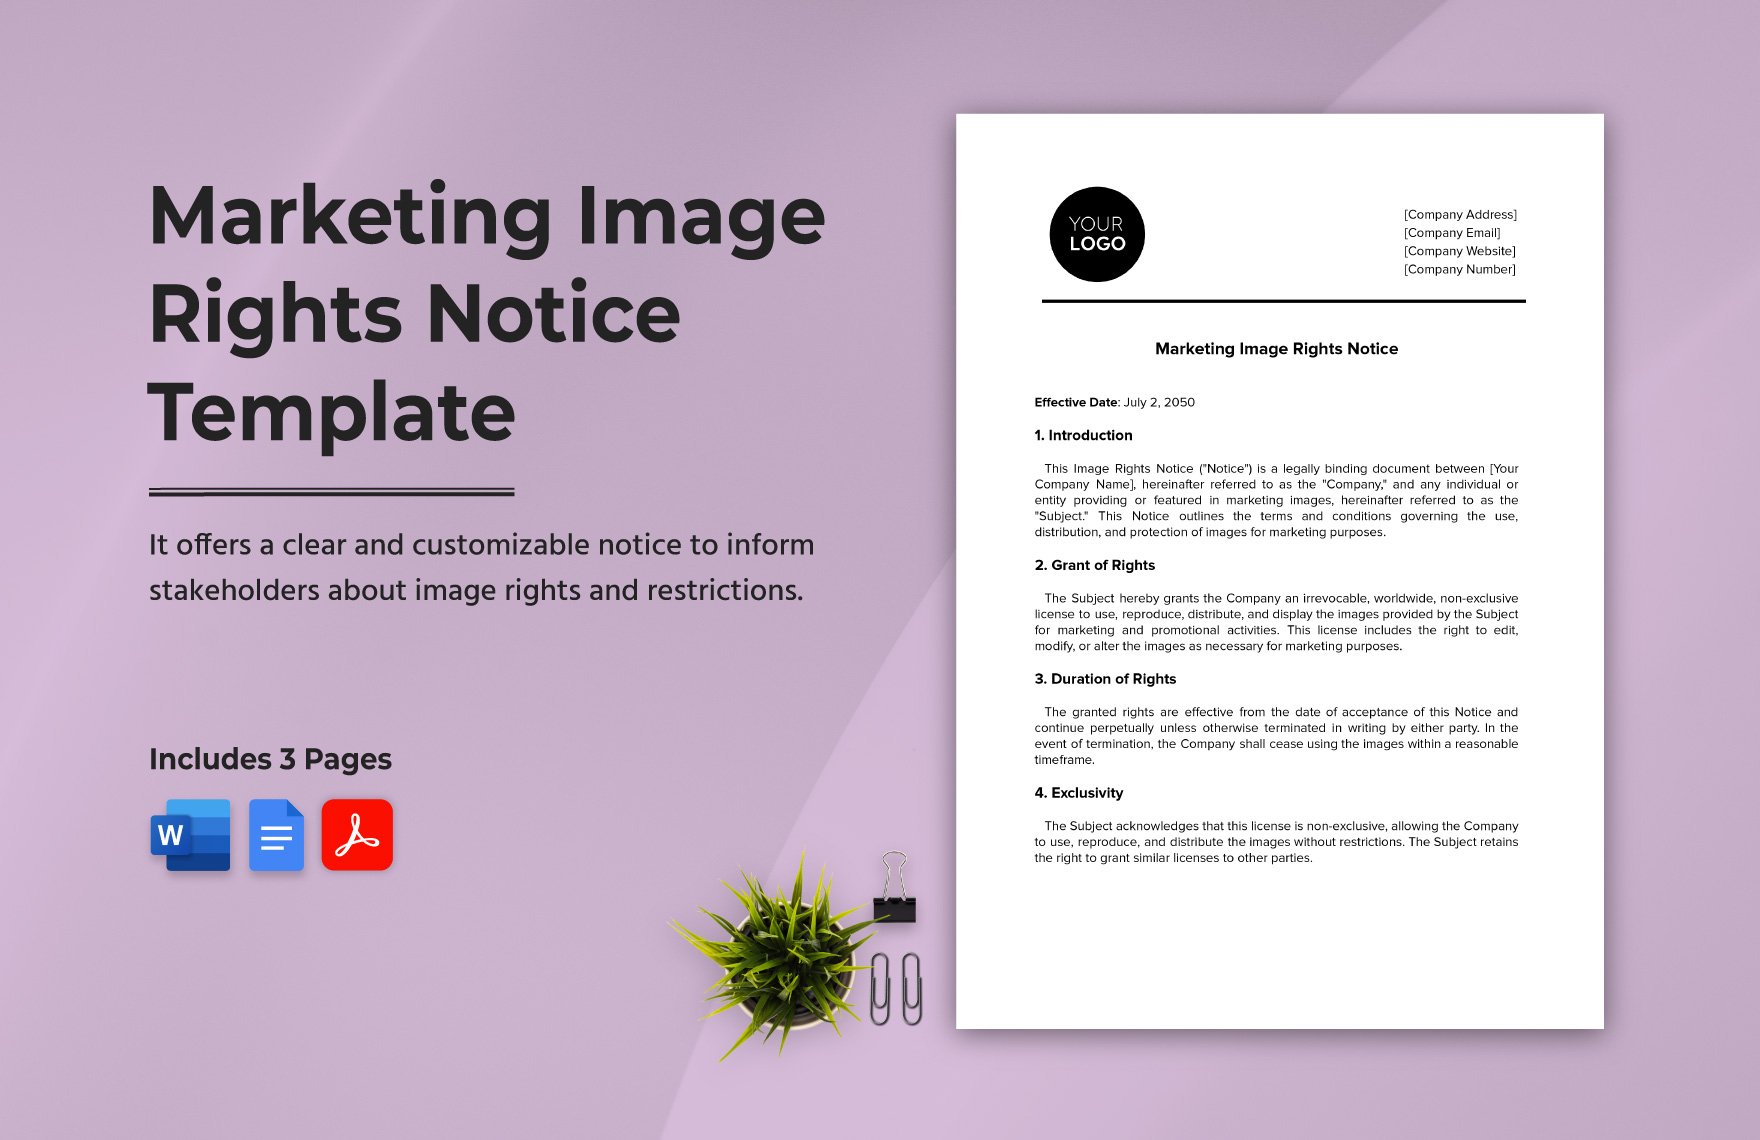 Marketing Image Rights Notice Template in Word, Google Docs, PDF